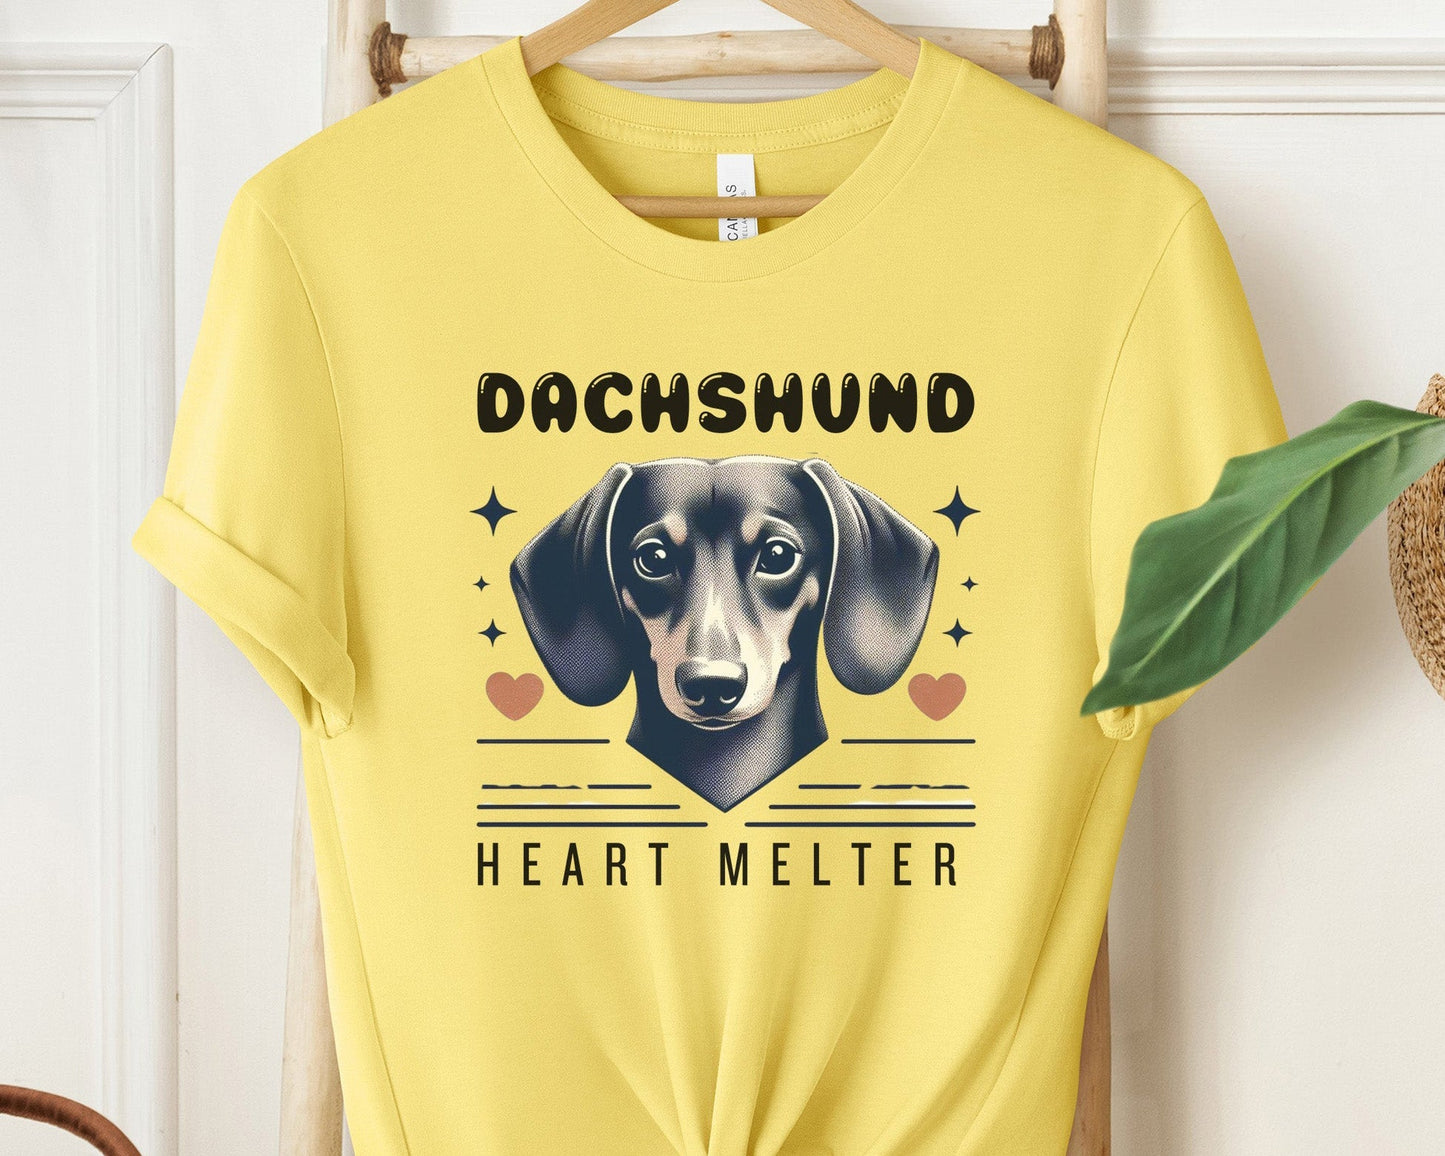 Dachshund Heart Melter Unisex Cotton T-Shirt - Retro Style Tee with Cute Dog Print